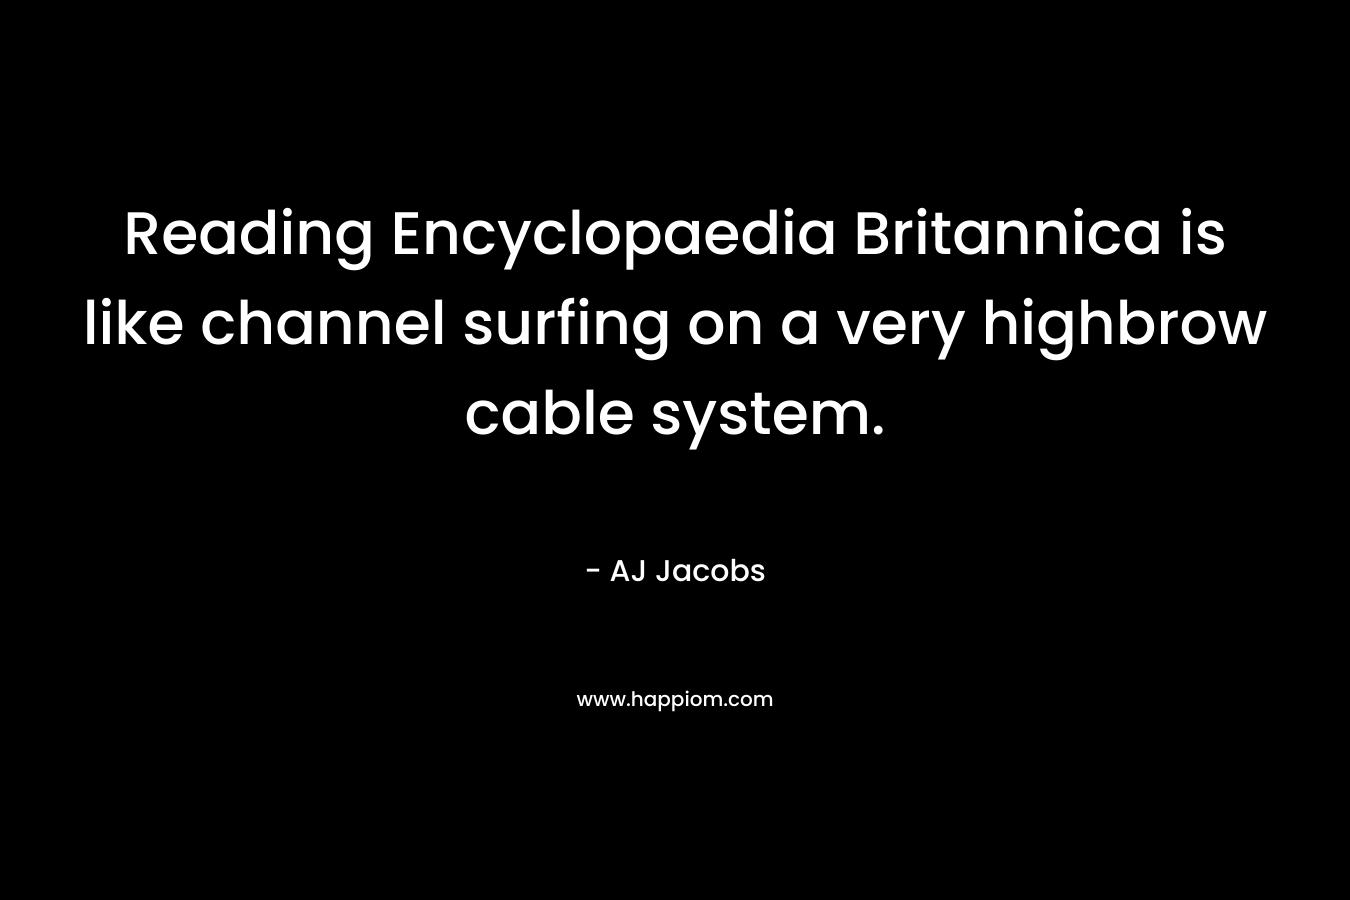 Reading Encyclopaedia Britannica is like channel surfing on a very highbrow cable system. – AJ Jacobs